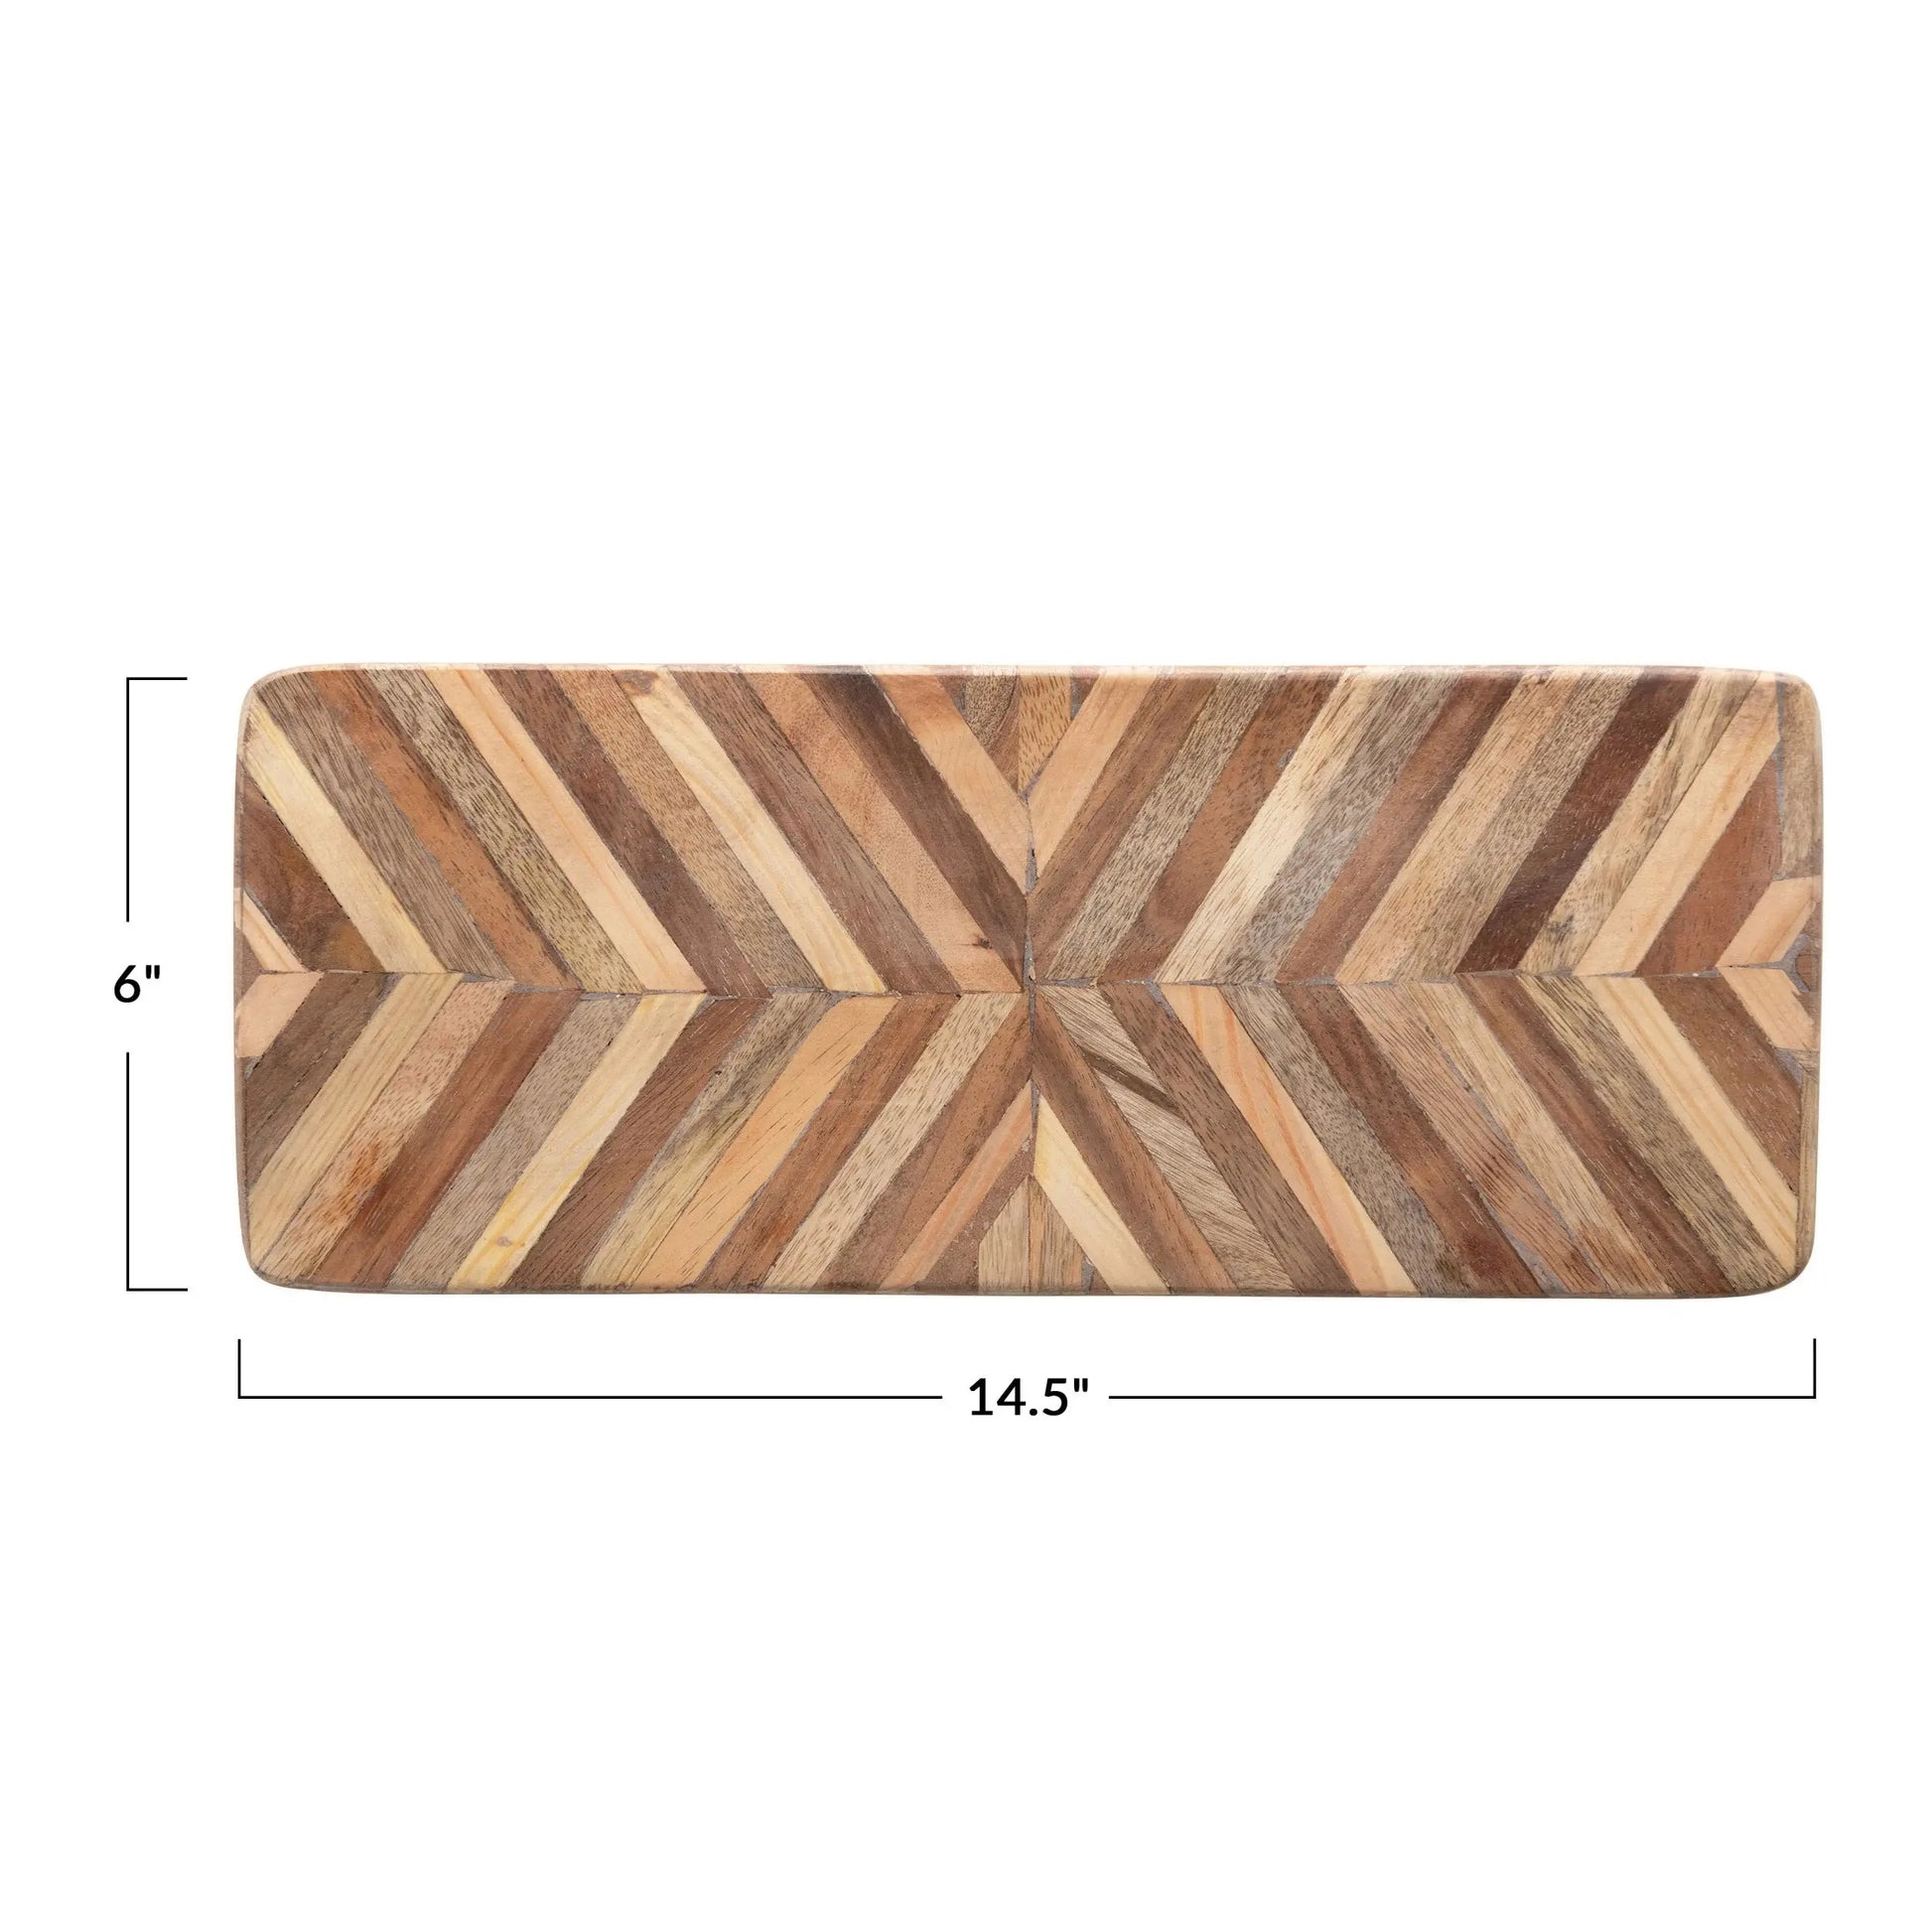 Wood Cheese/Cutting Board with Chevron Pattern CREATIVE CO-OP